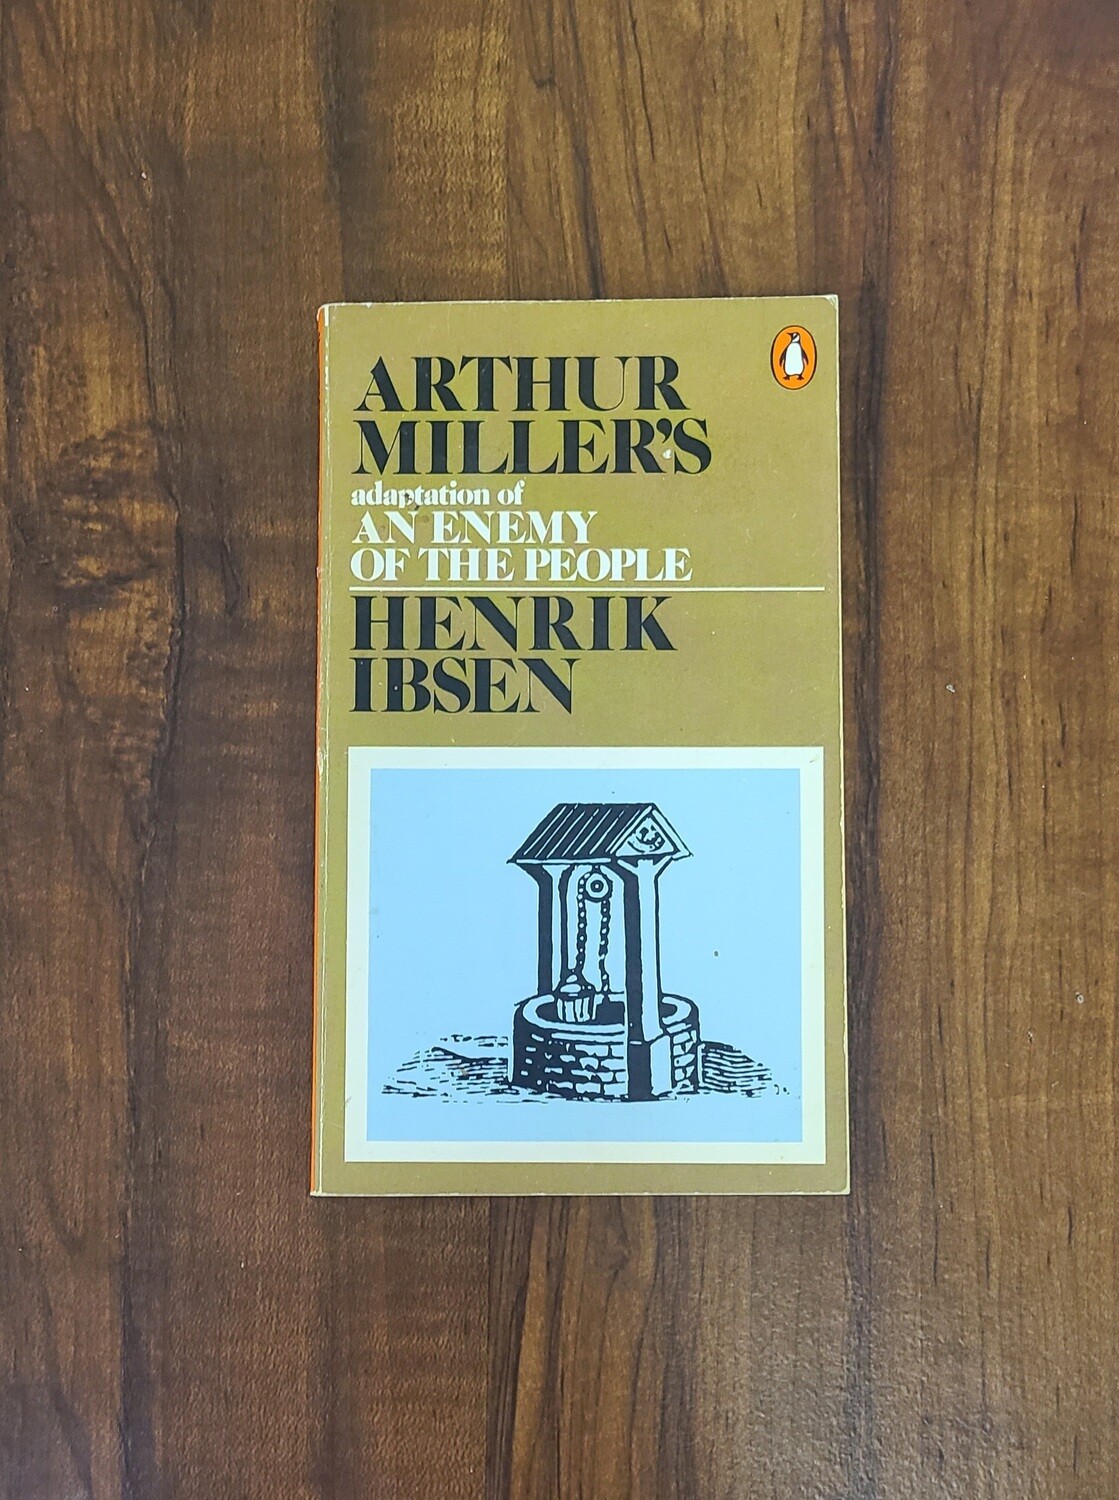 An Enemy of The People by Arthur Miller's & Henrik Ibsen